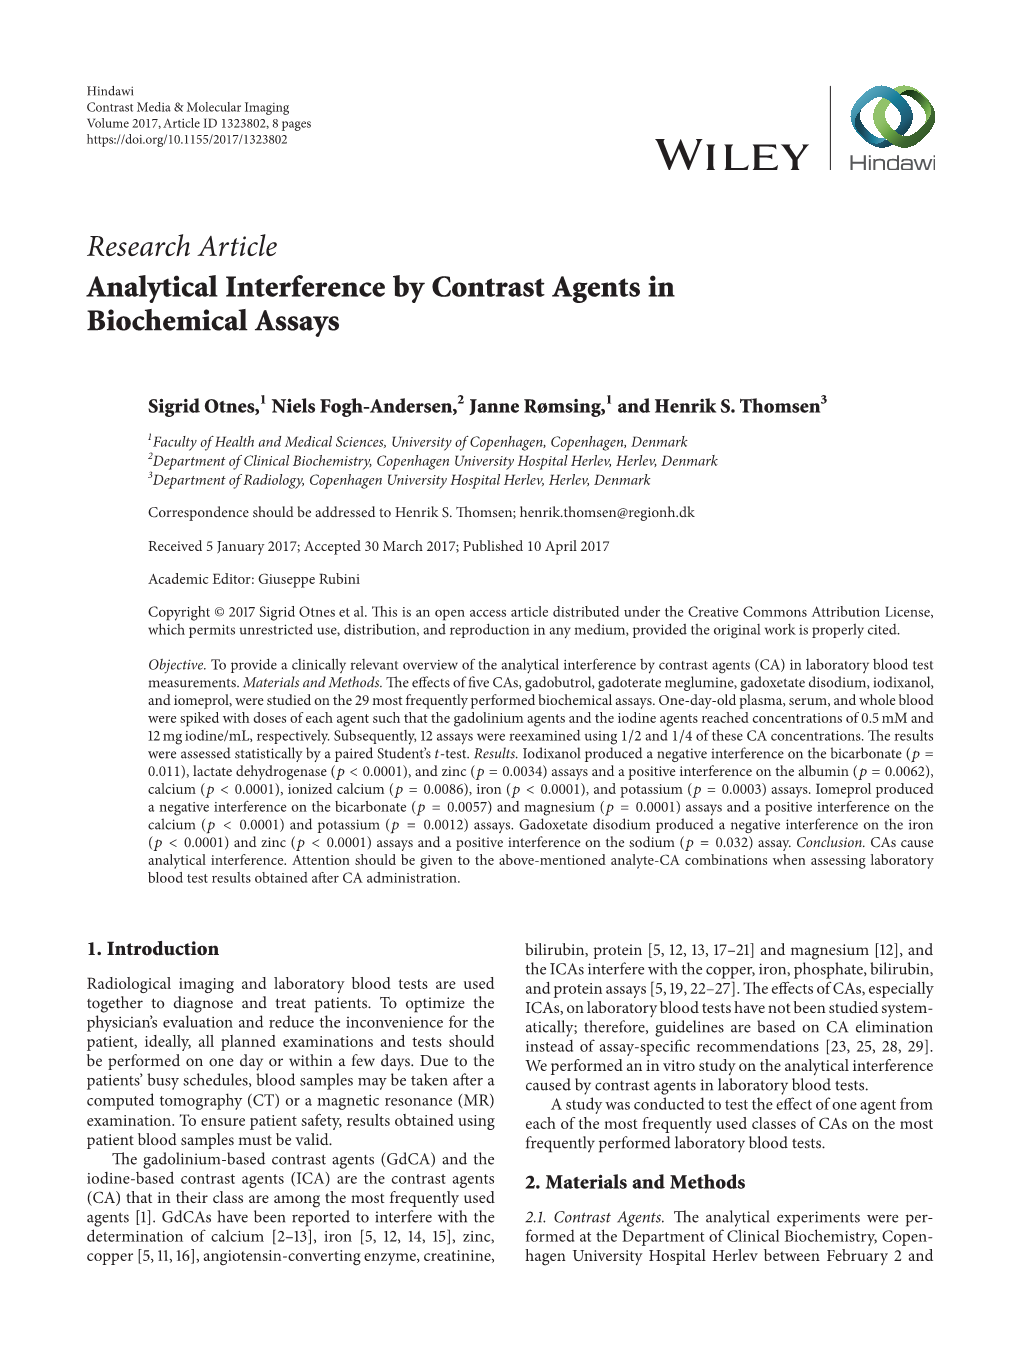 Analytical Interference by Contrast Agents in Biochemical Assays